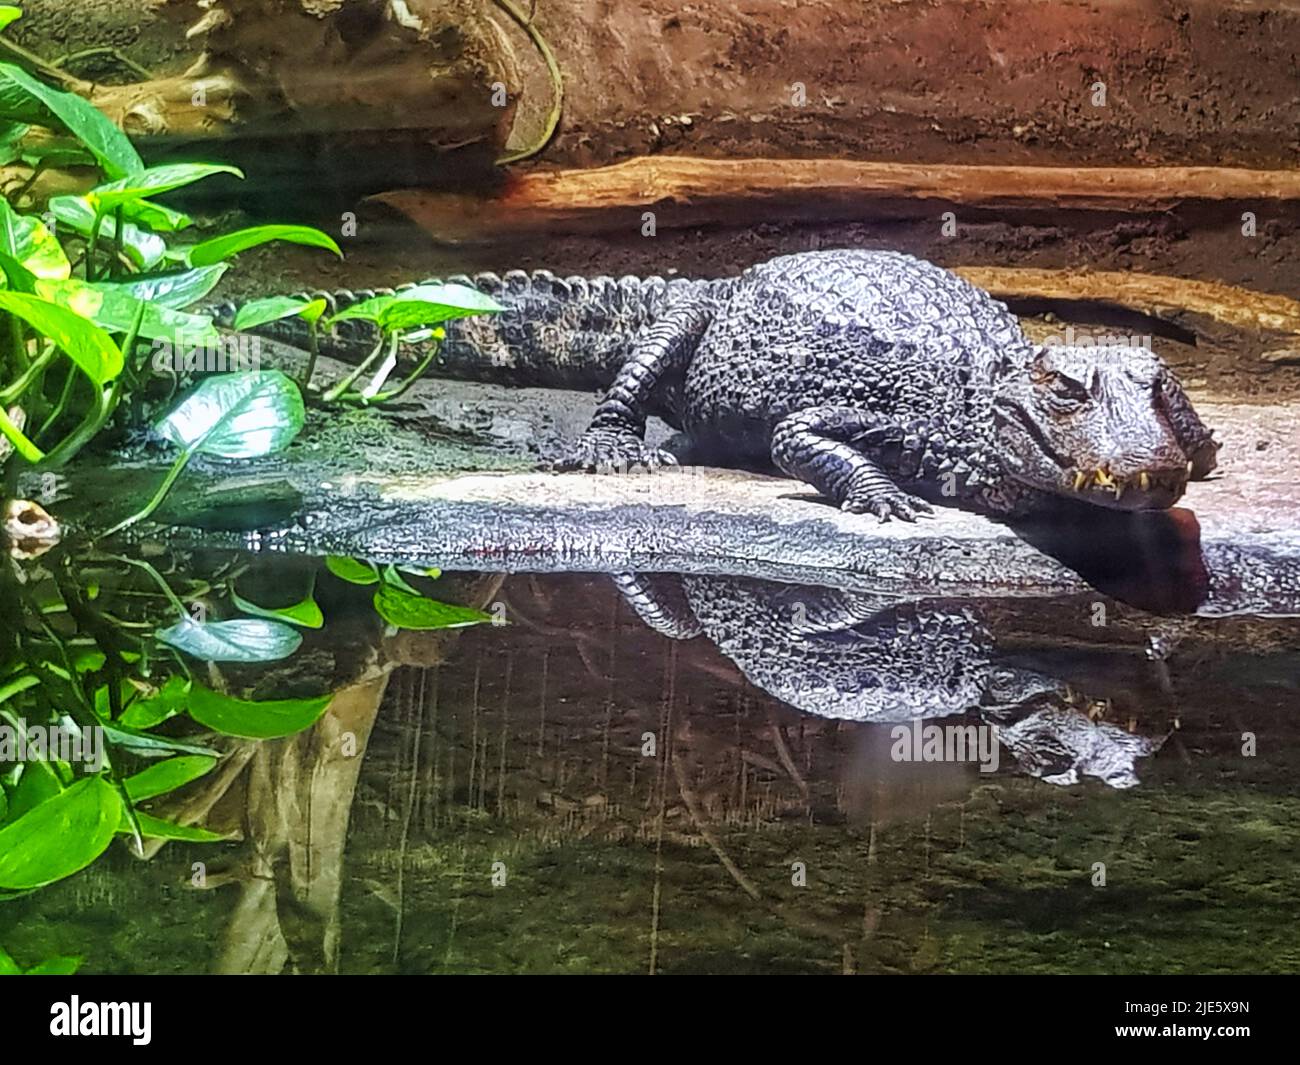 Spectacled caiman at Chester zoo. Chester, UK. Stock Photo